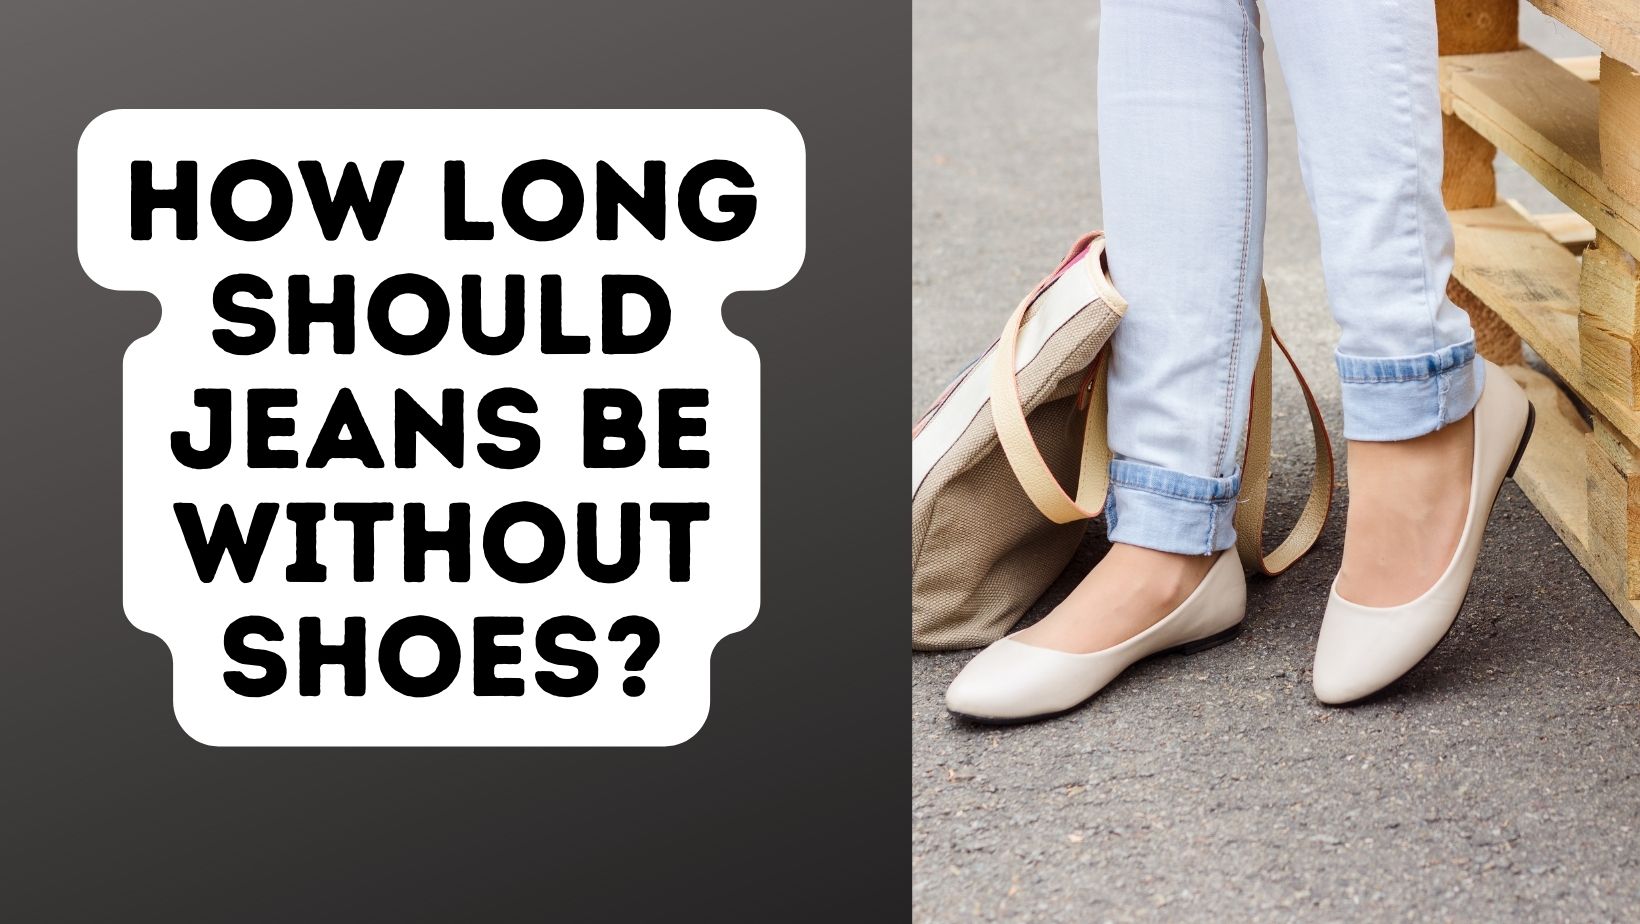 How Long Should Jeans Be Without Shoes?